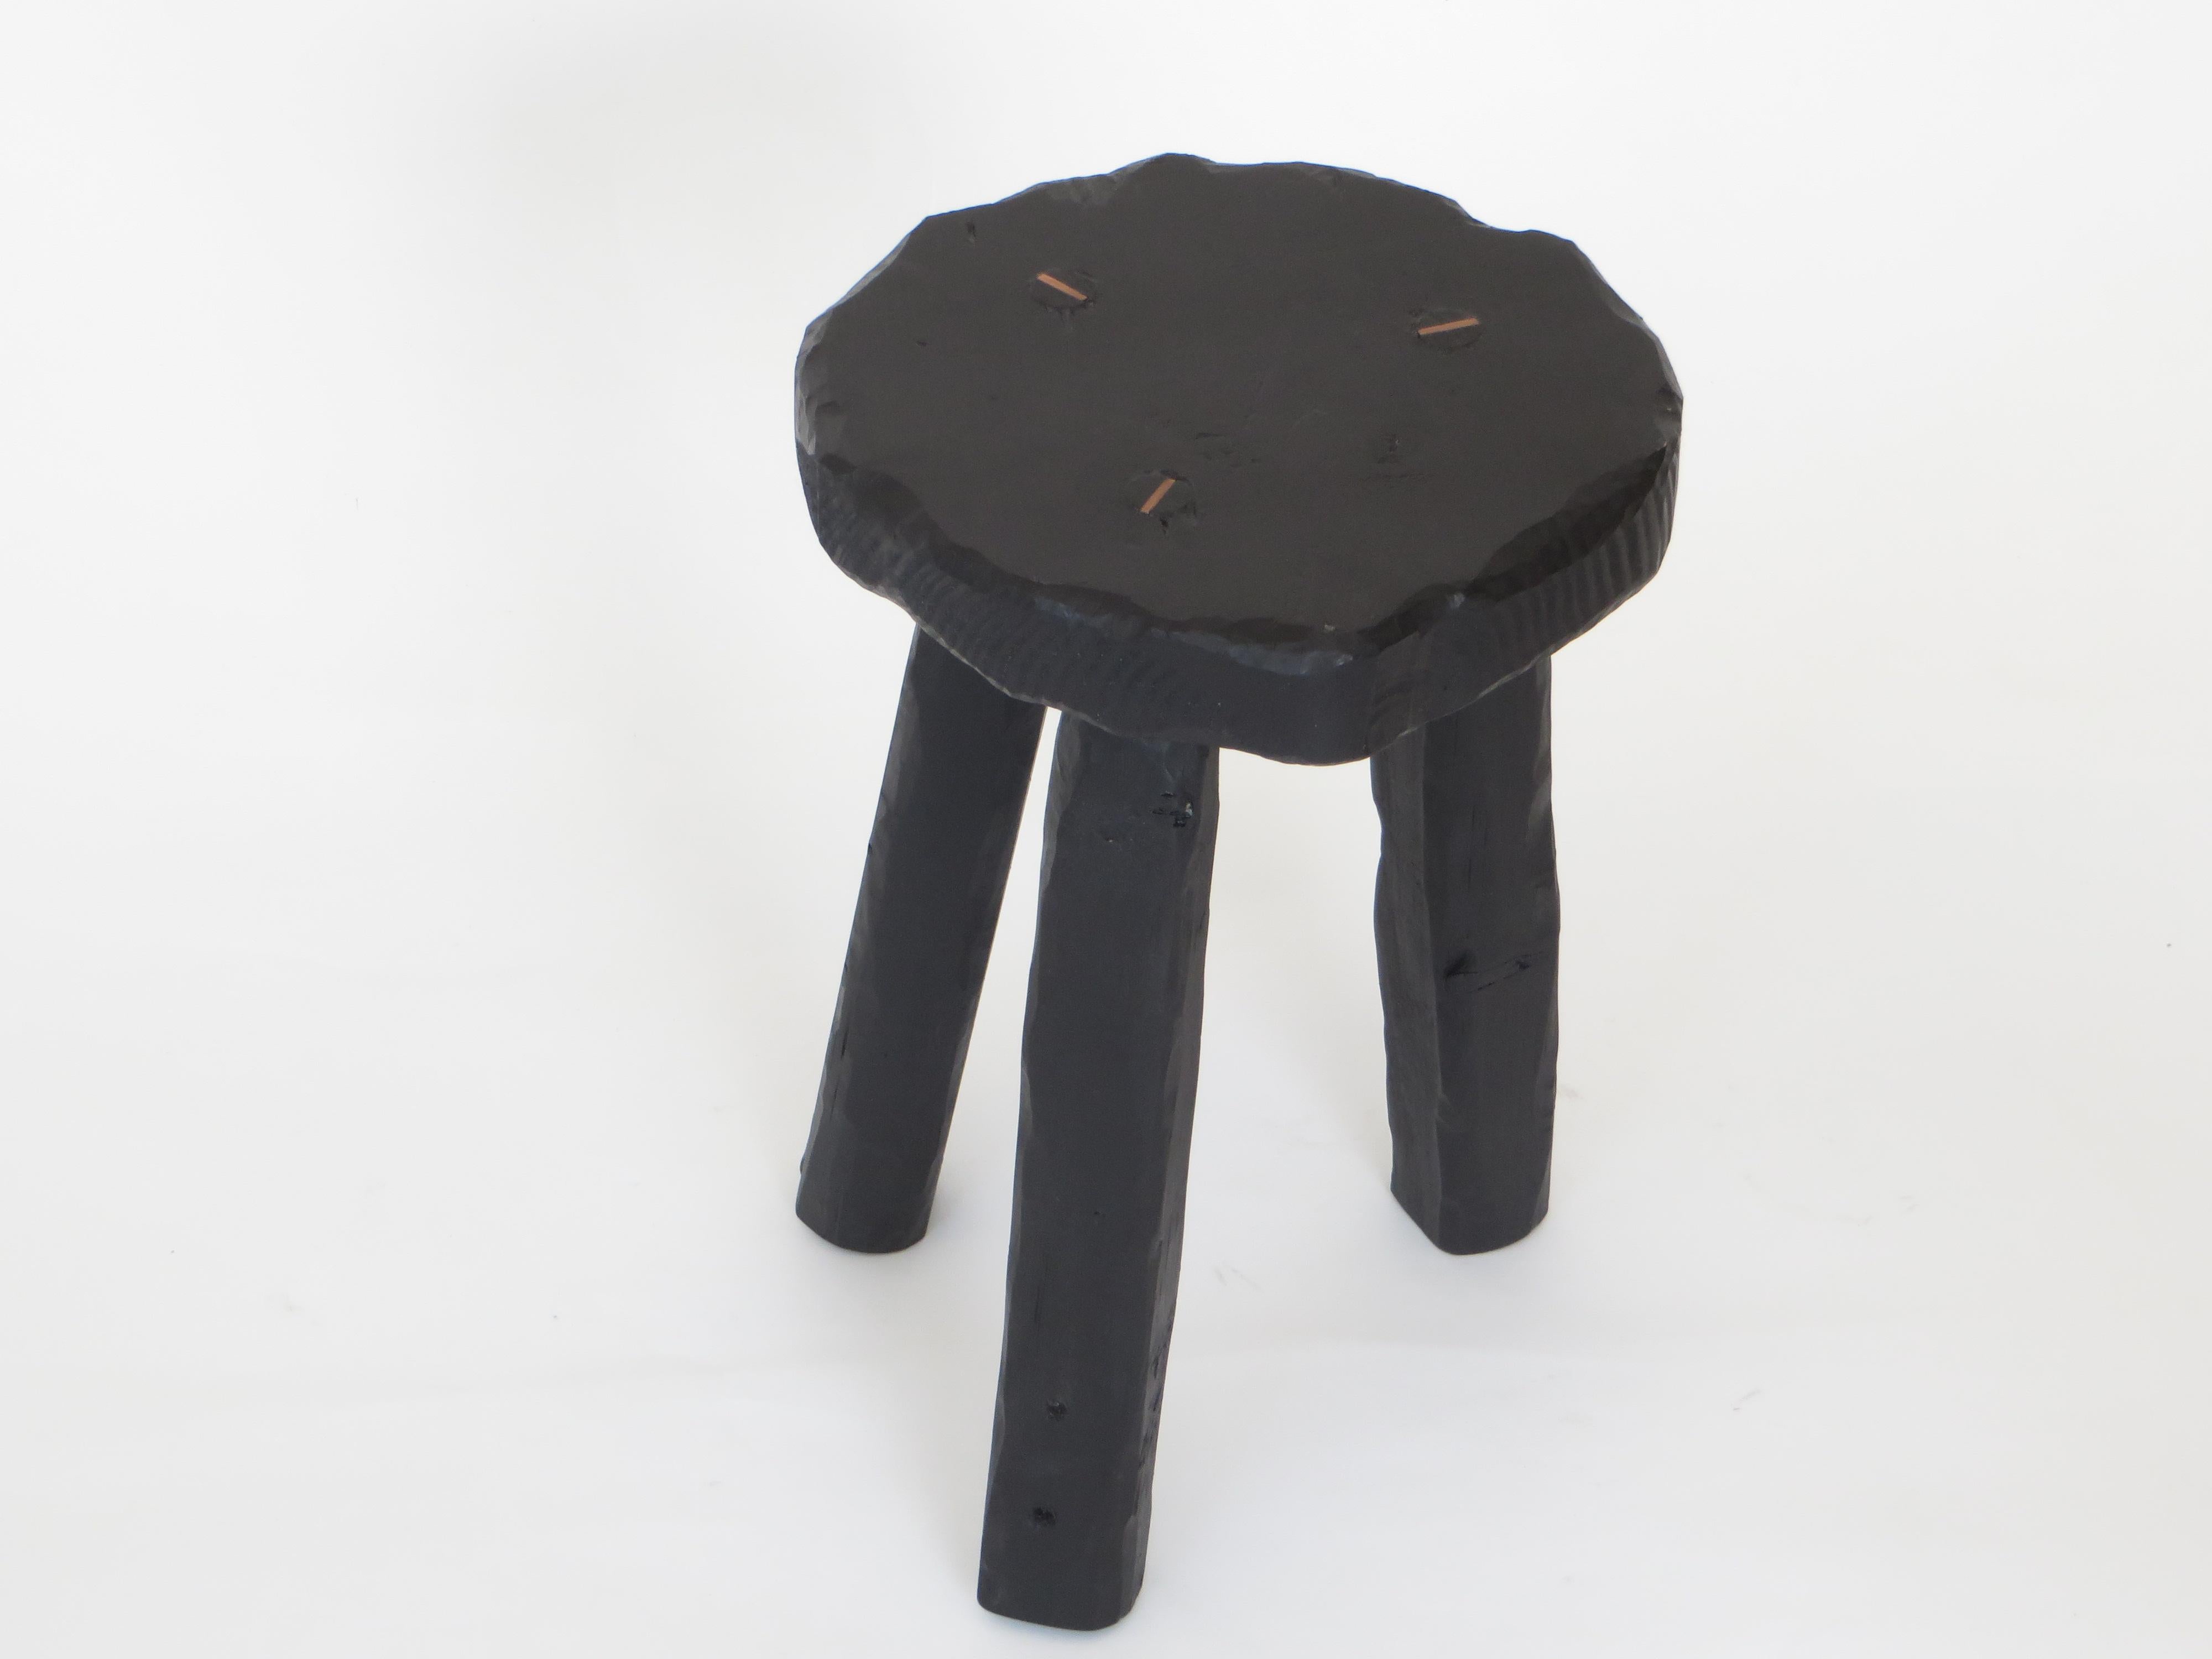 Reclaimed Wood Hannah Vaughan Anthropological Collection Stools Number Three and Four